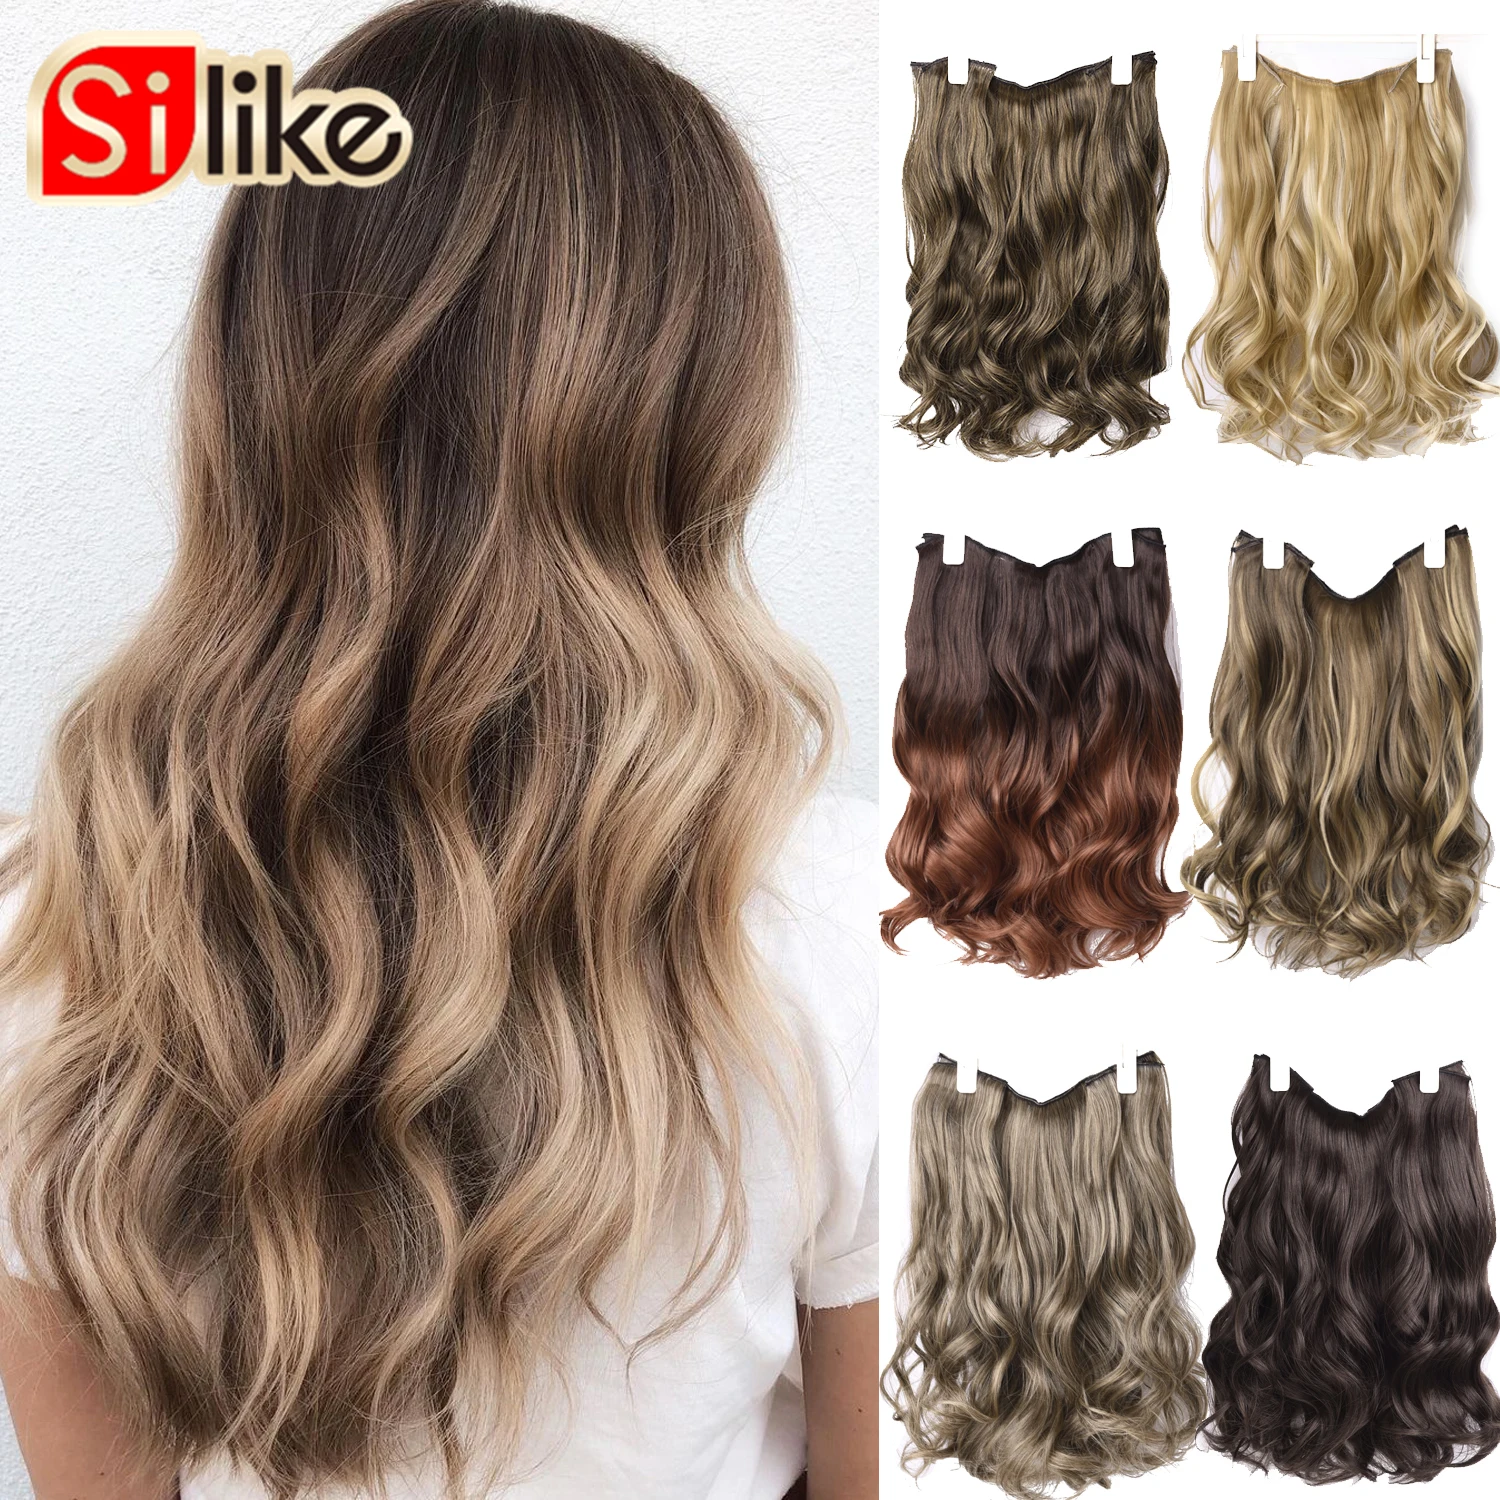 Silike 16Inch Synthetic Fish Line Hair 6 Clips Wavy Long Heat Resistant Synthetic Invisible Wire Three Hairpieces For Women